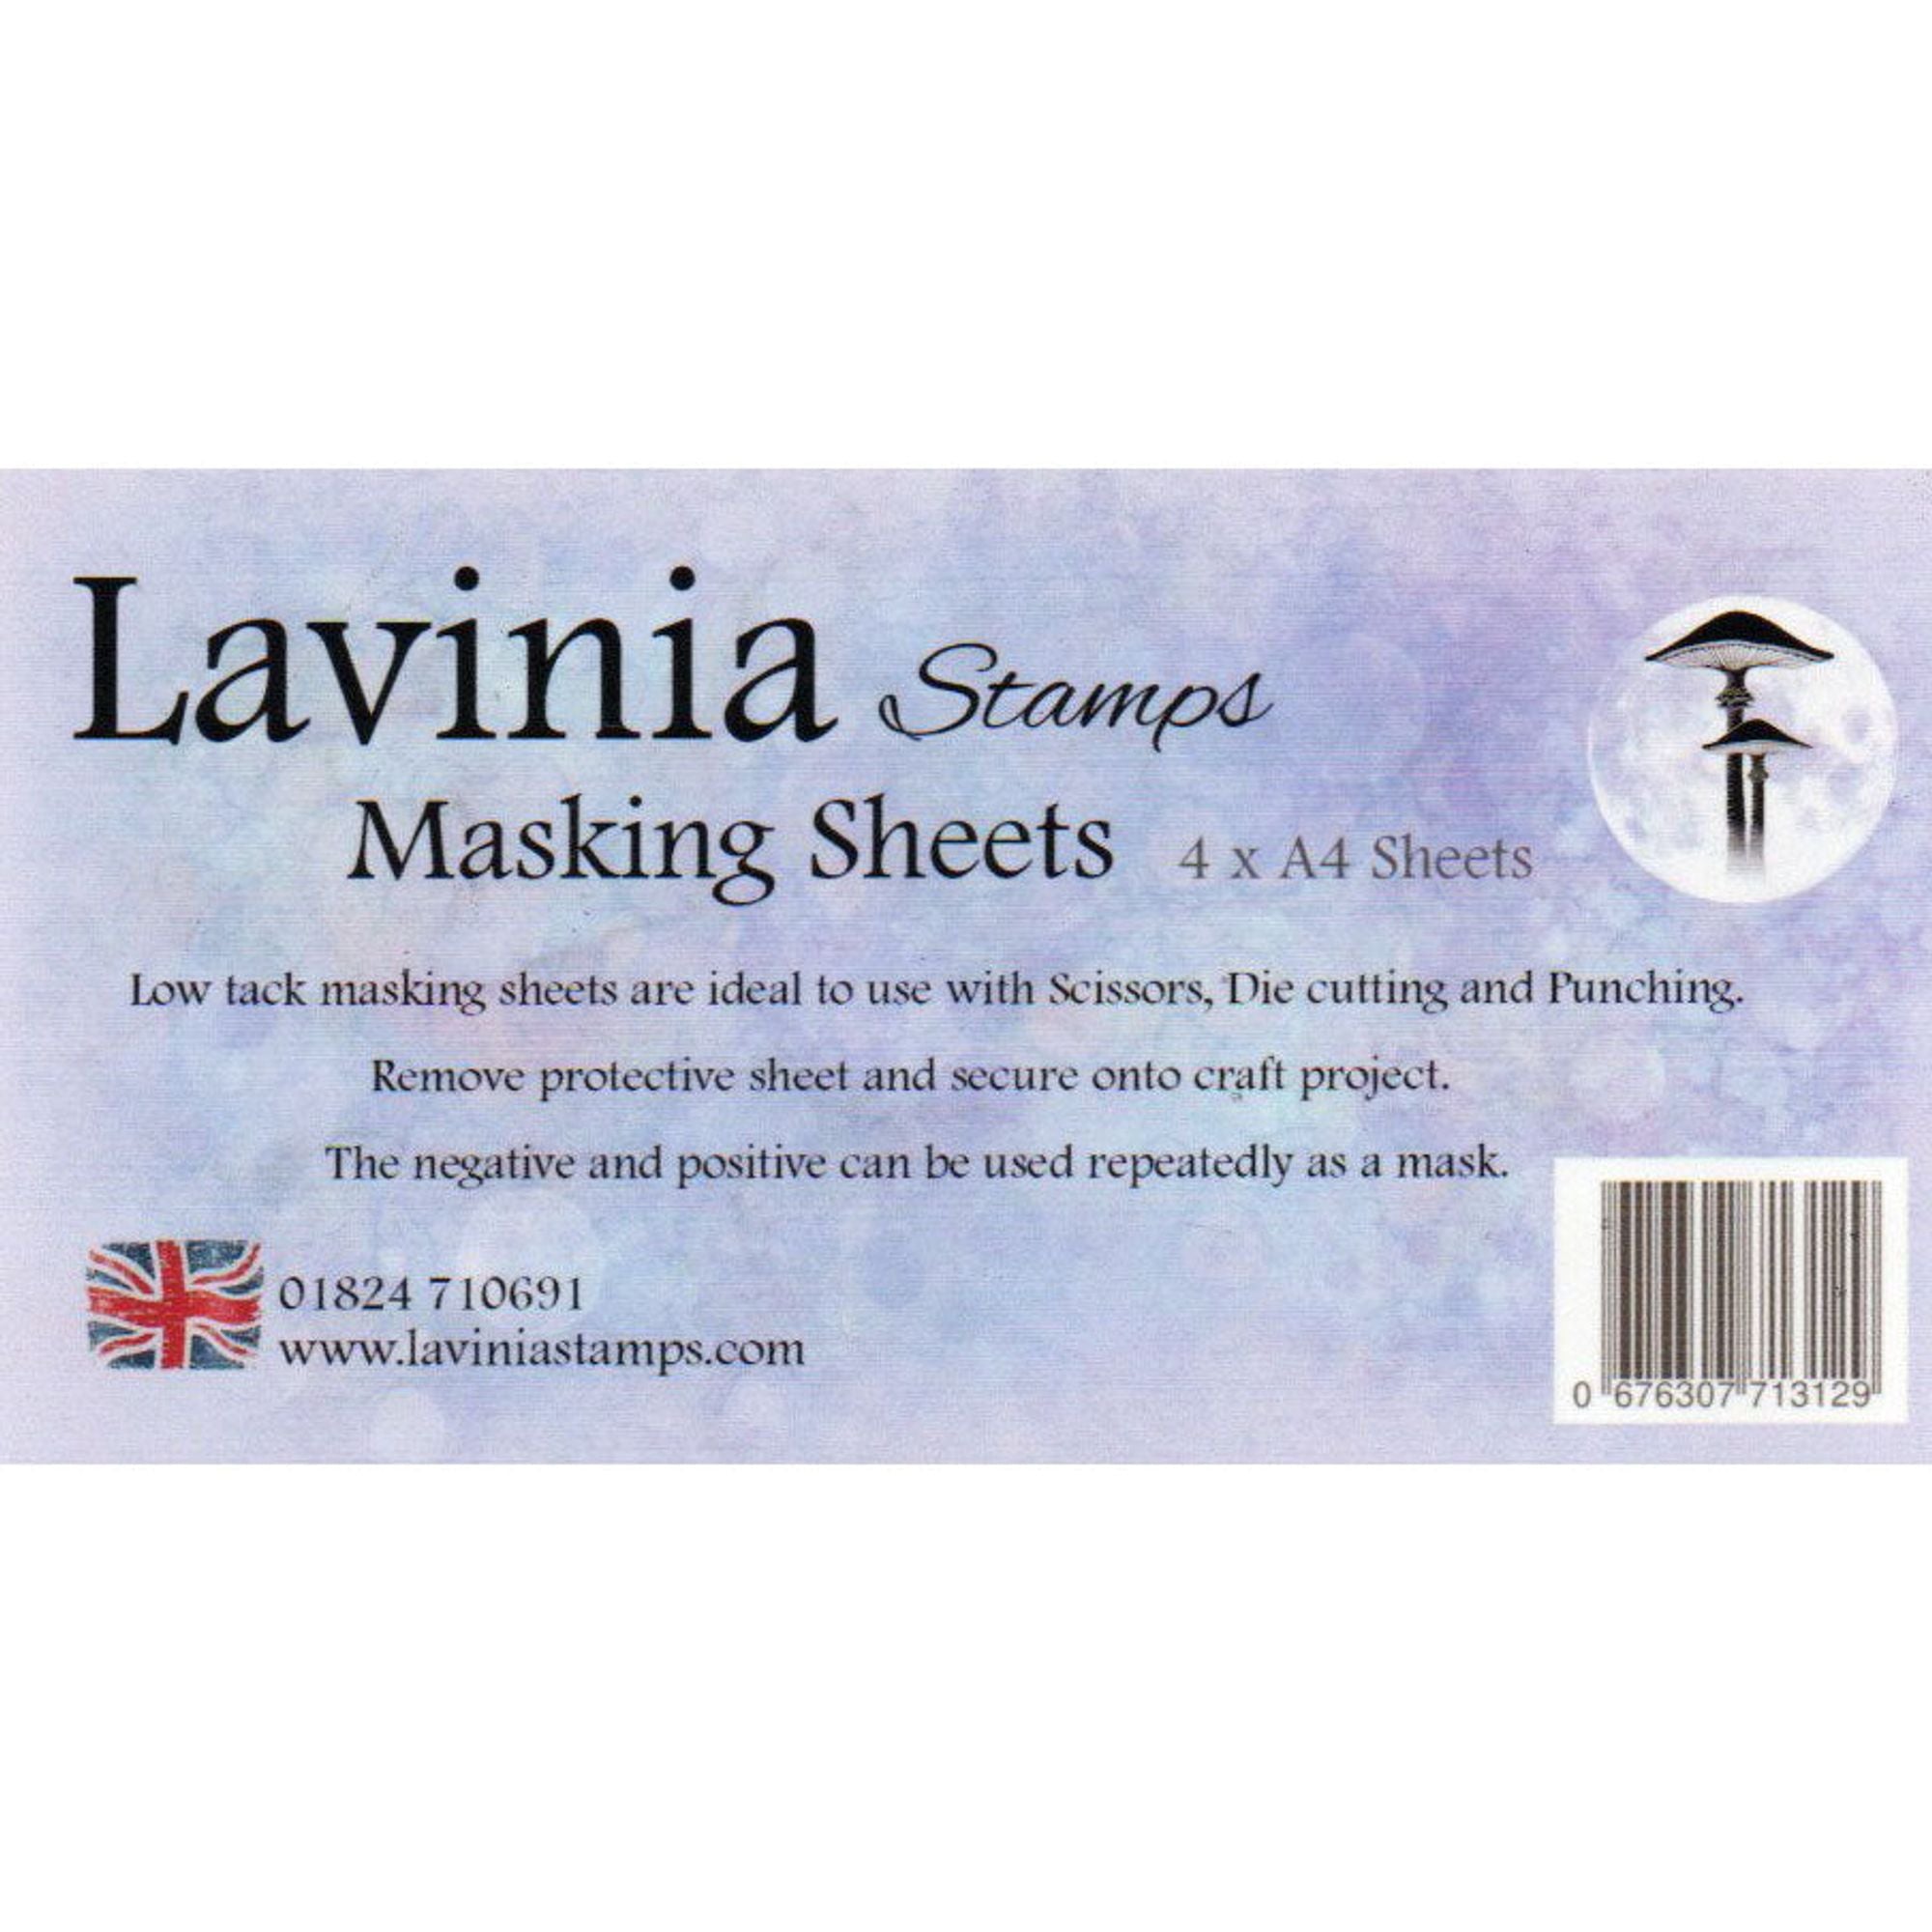 Lavinia Stamps Masking Sheets - 4 x A4 Sheets